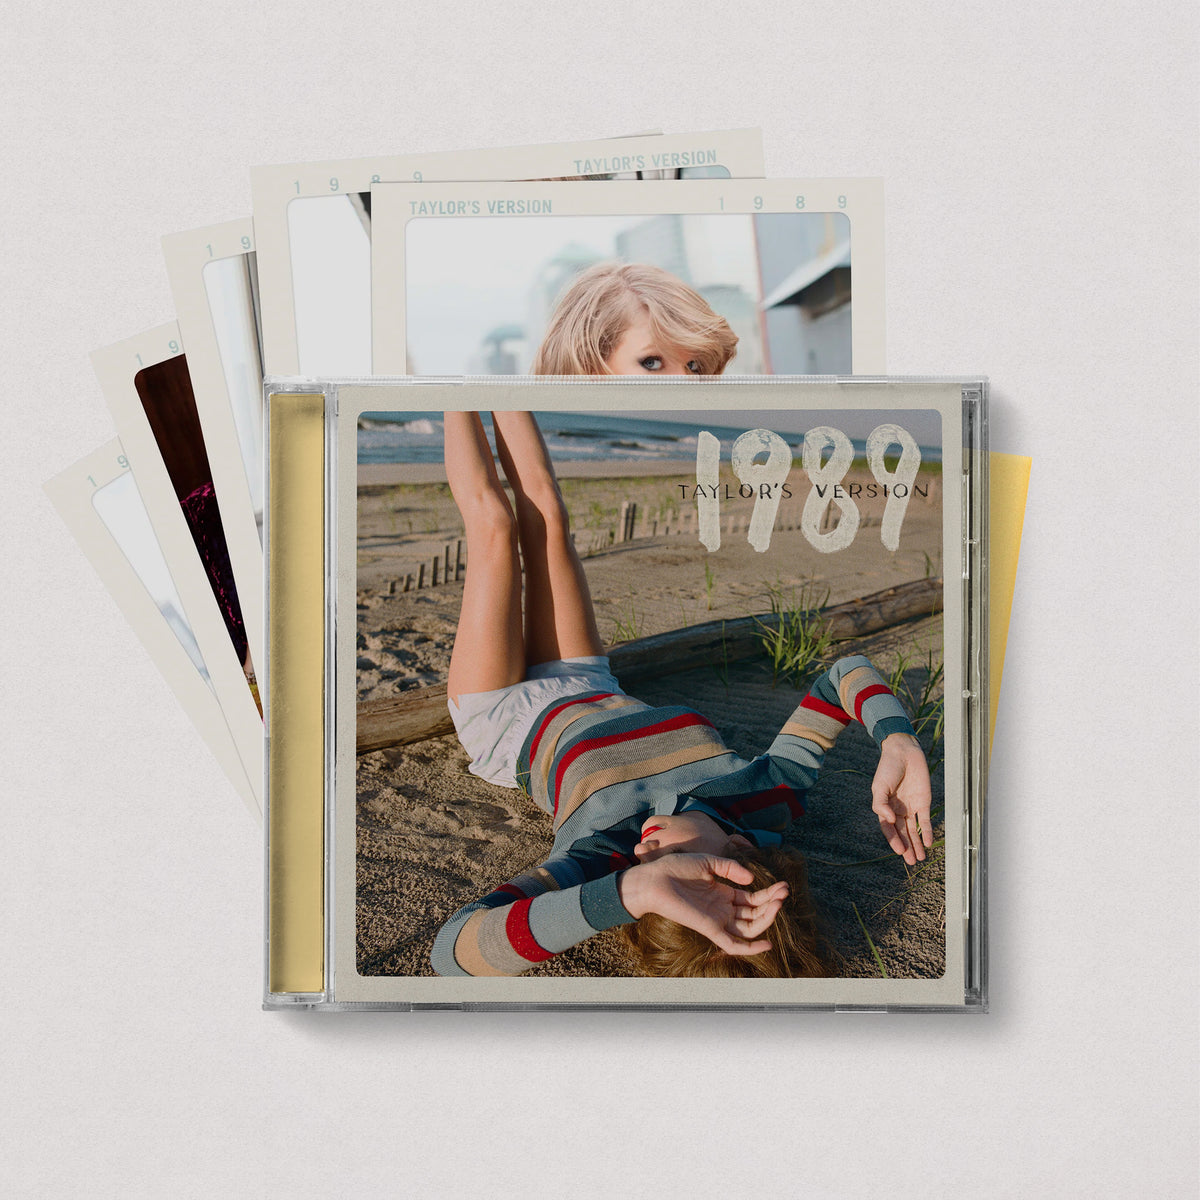 Taylor Swift - 1989 "Taylor's Version" (Sunrise Boulevard Yellow Edition, Deluxe CD)